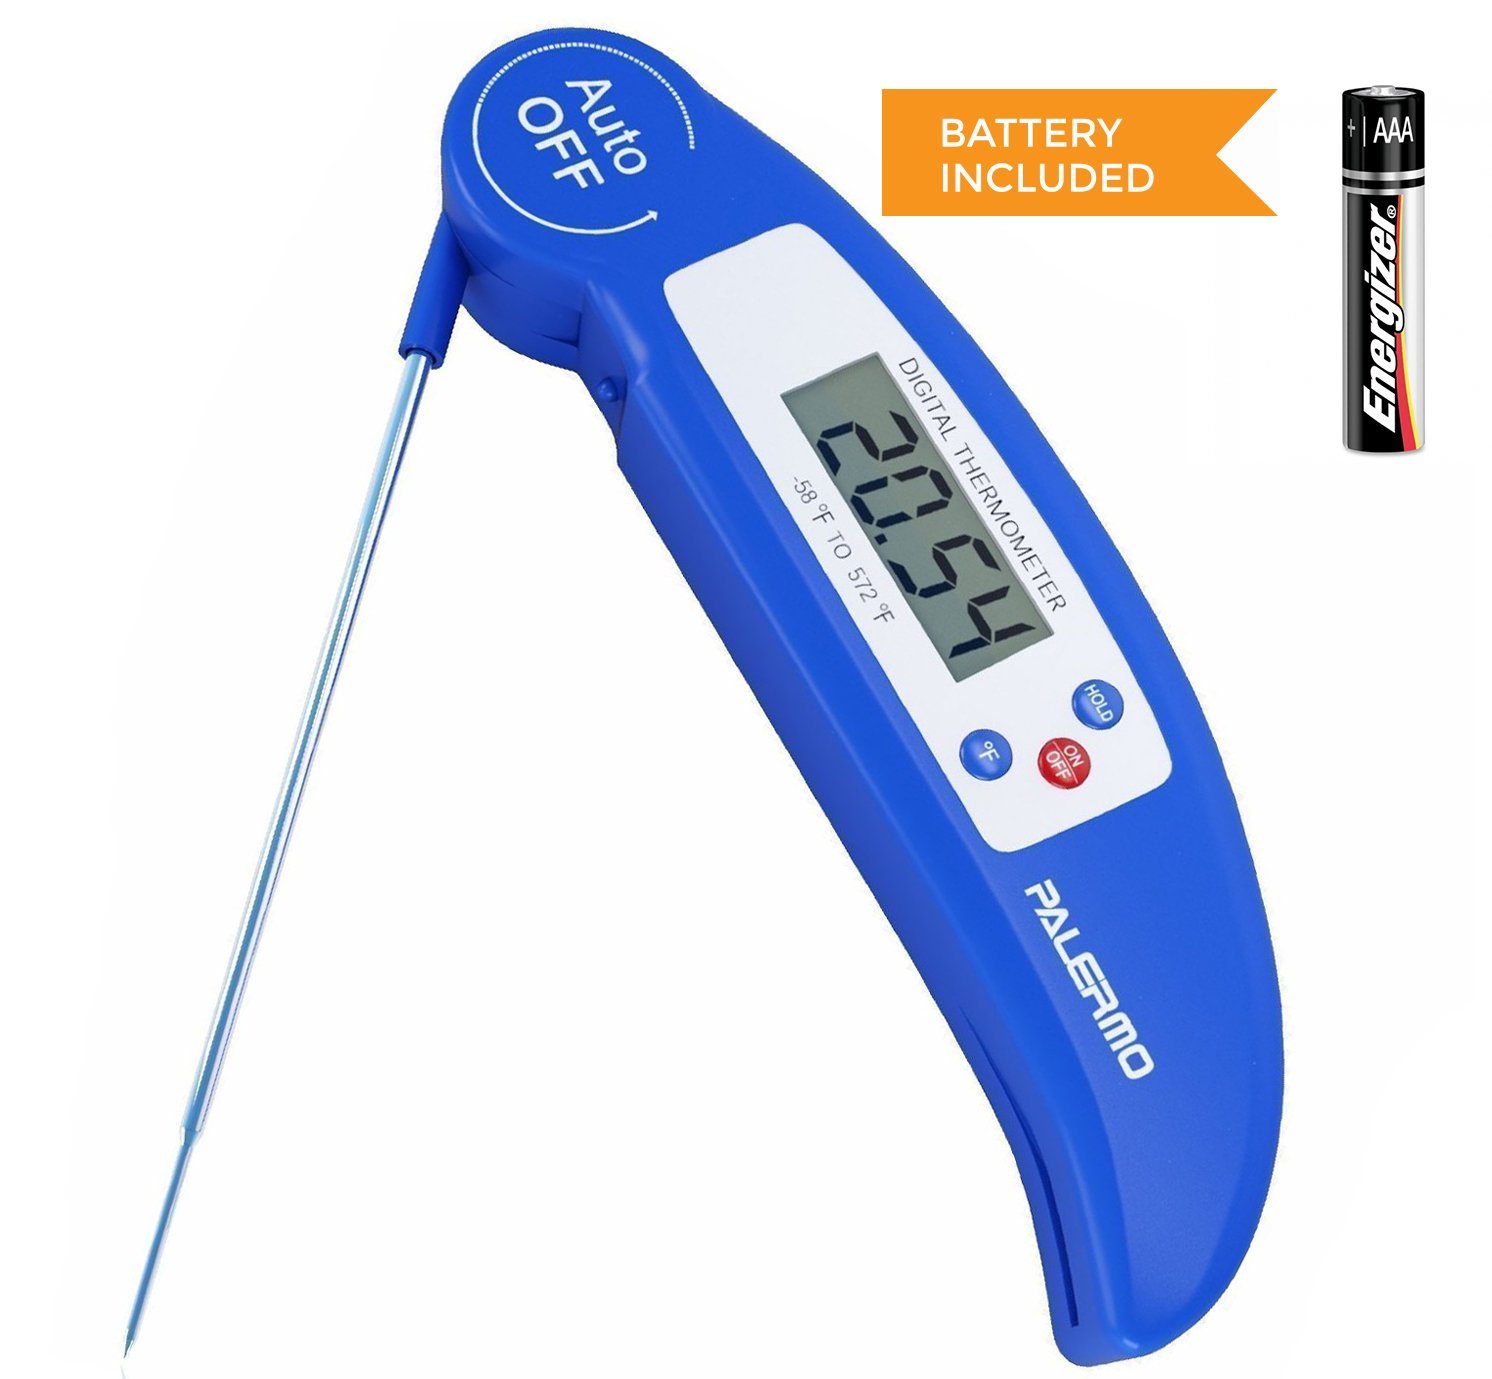 Thermometer photo